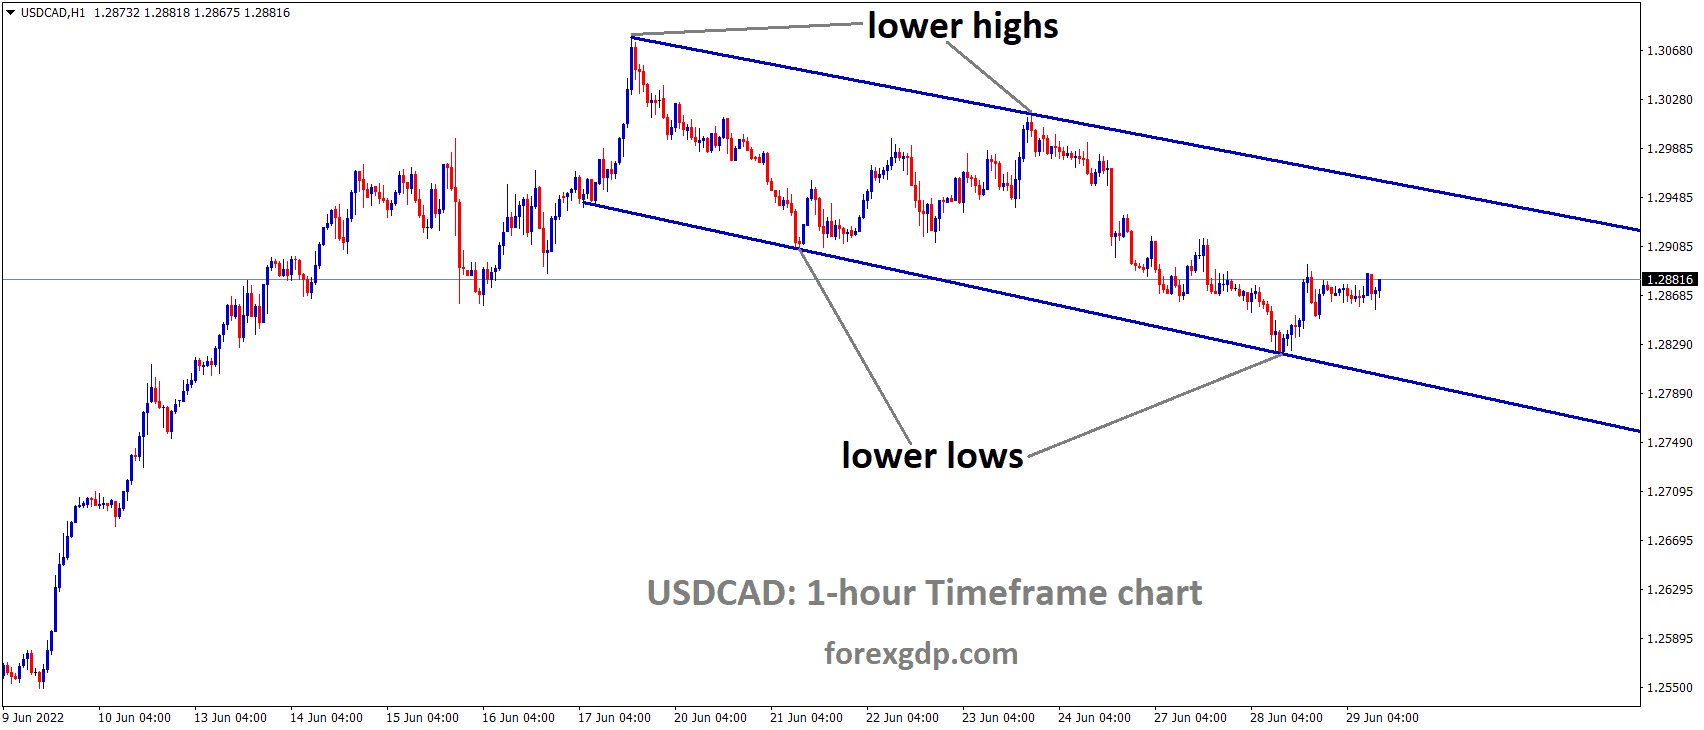 USDCAD is moving in the Descending channel and the Market has rebounded from the Lower Low area of the channel.